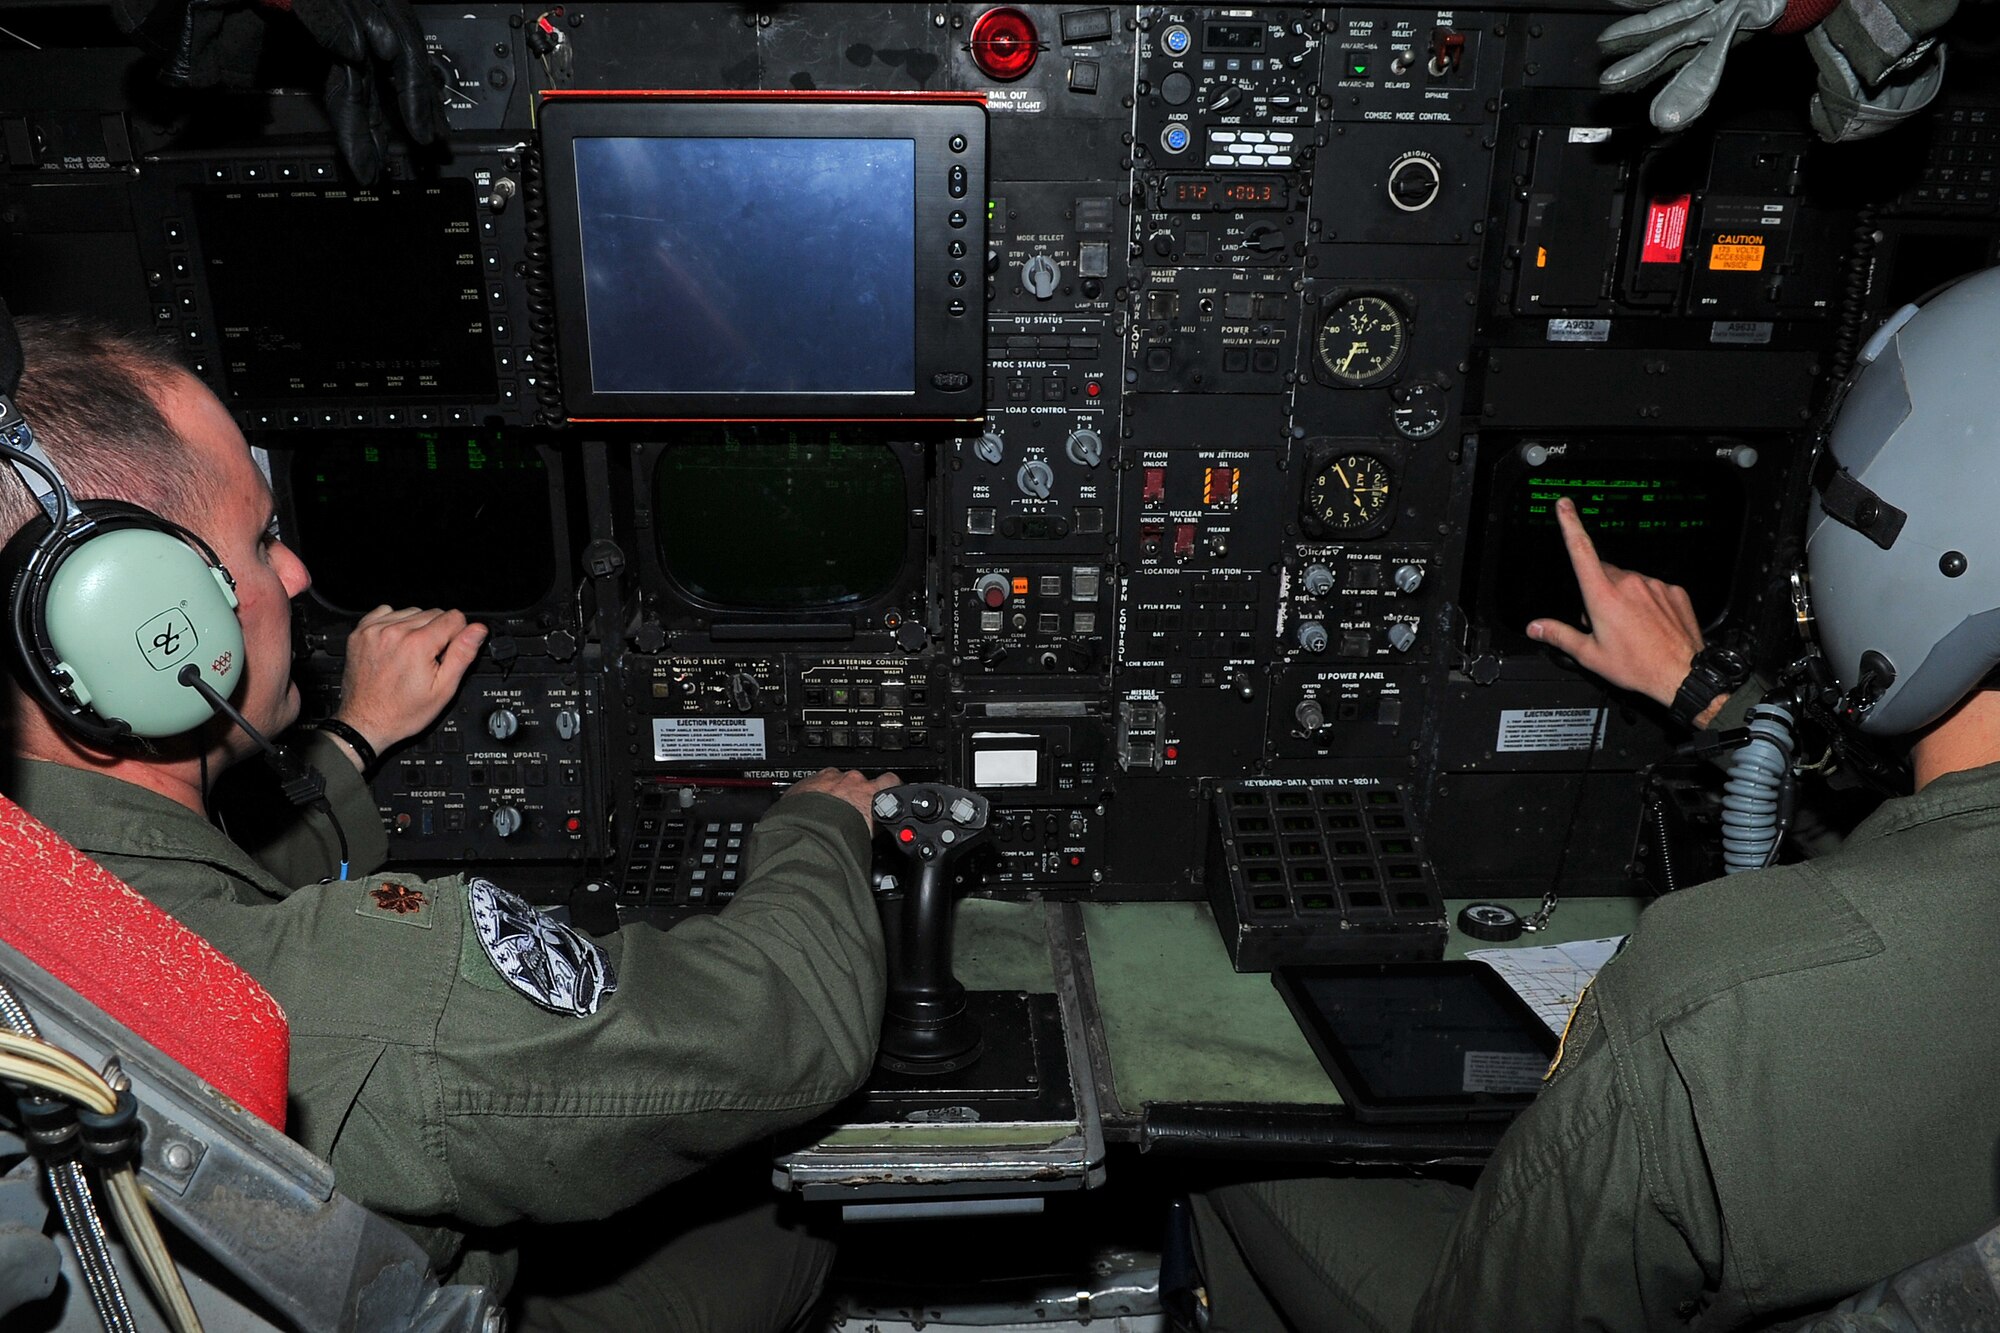 Maj. Andrew Marshall, 20th Expeditionary Bomb Squadron radar navigator, and 1st Lt. Bryant Curdy, 20th EBS navigator, implement an in-flight checklist during a B-52H Stratofortress training mission in the Asia-Pacific region April 15, 2015. The B-52 crews are deployed from Barksdale Air Force Base, La., to Andersen AFB, Guam, in support of U.S. Pacific Command’s Continuous Bomber Presence to strengthen regional security and stability. (U.S. Air Force photo by Staff Sgt. Melissa B. White/Released)